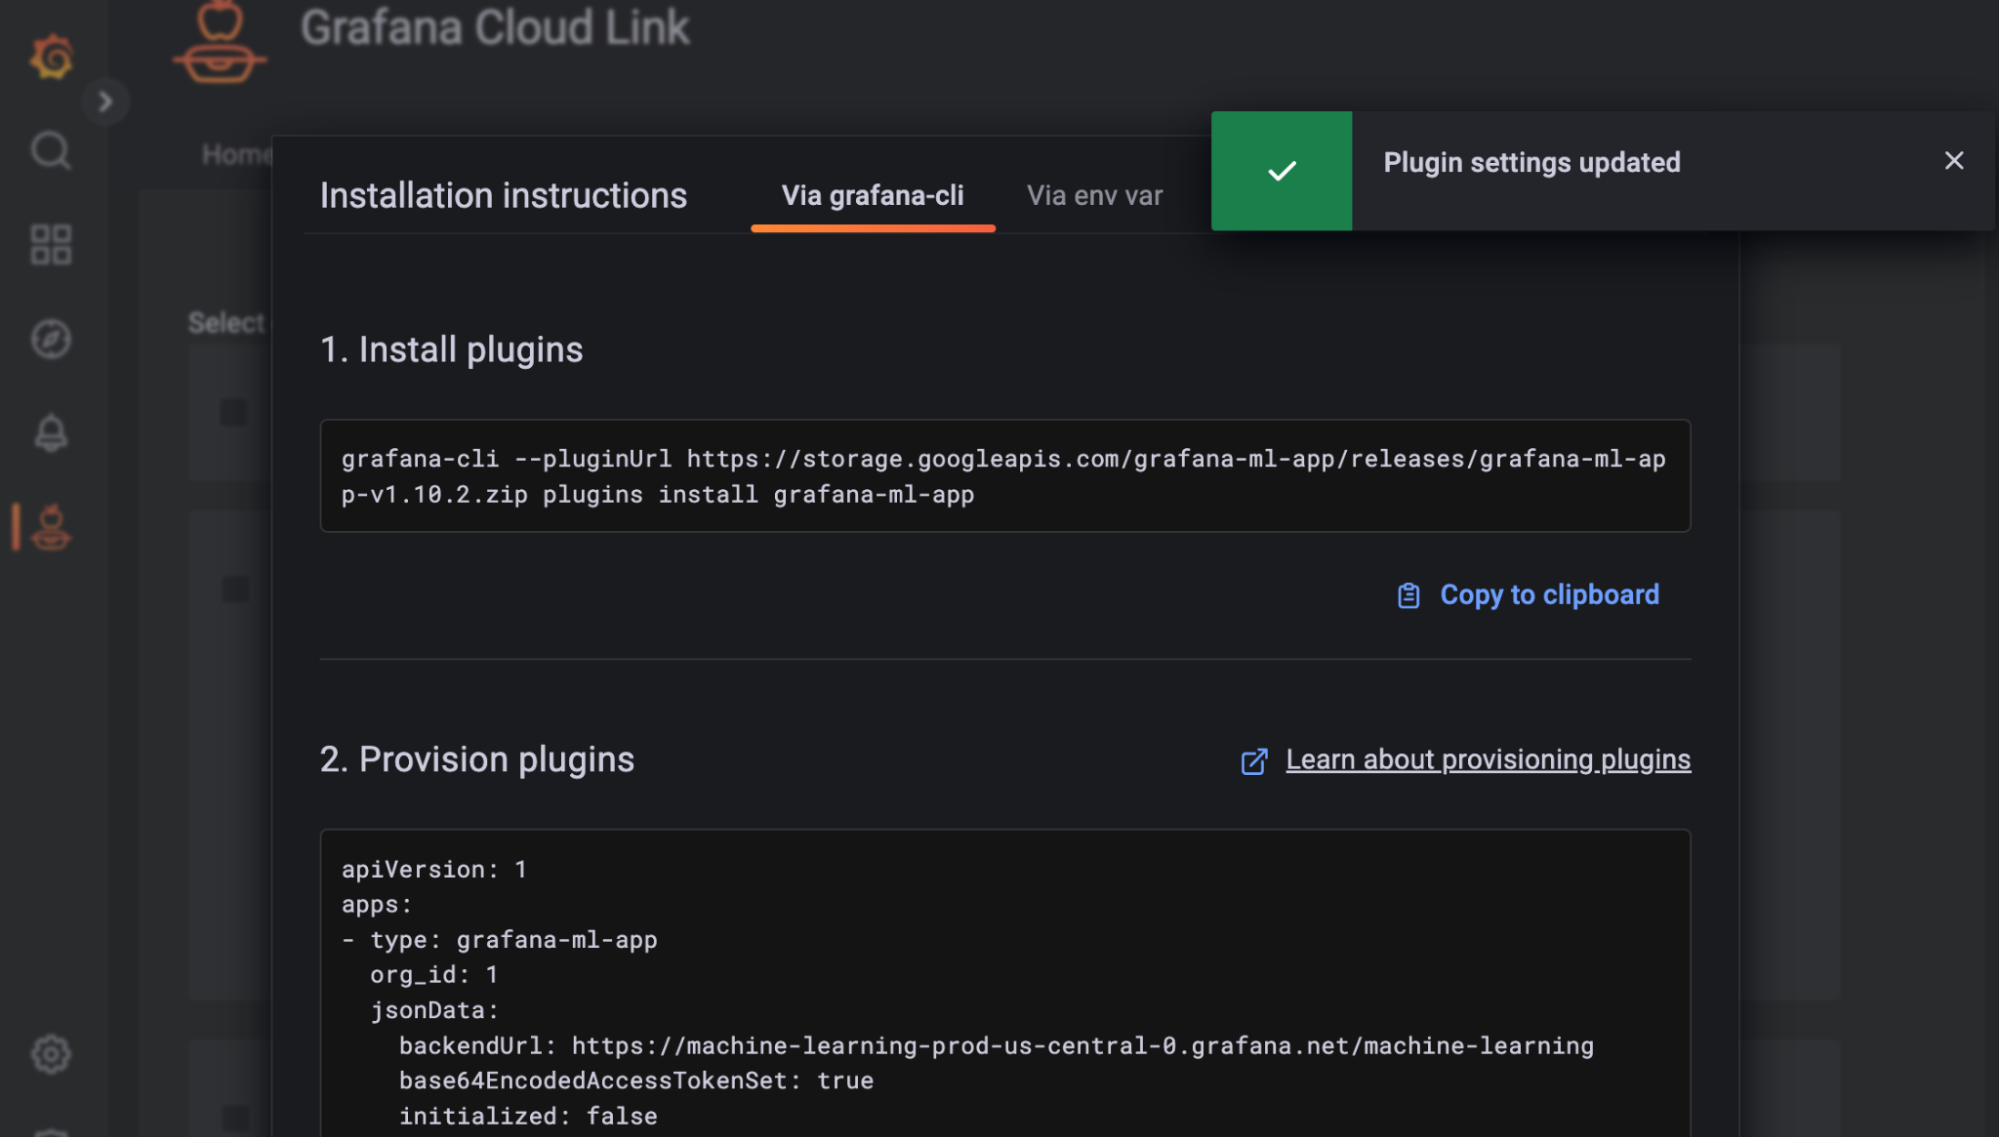 Screenshot of installation instructions in Import feature of Grafana Cloud Link. 